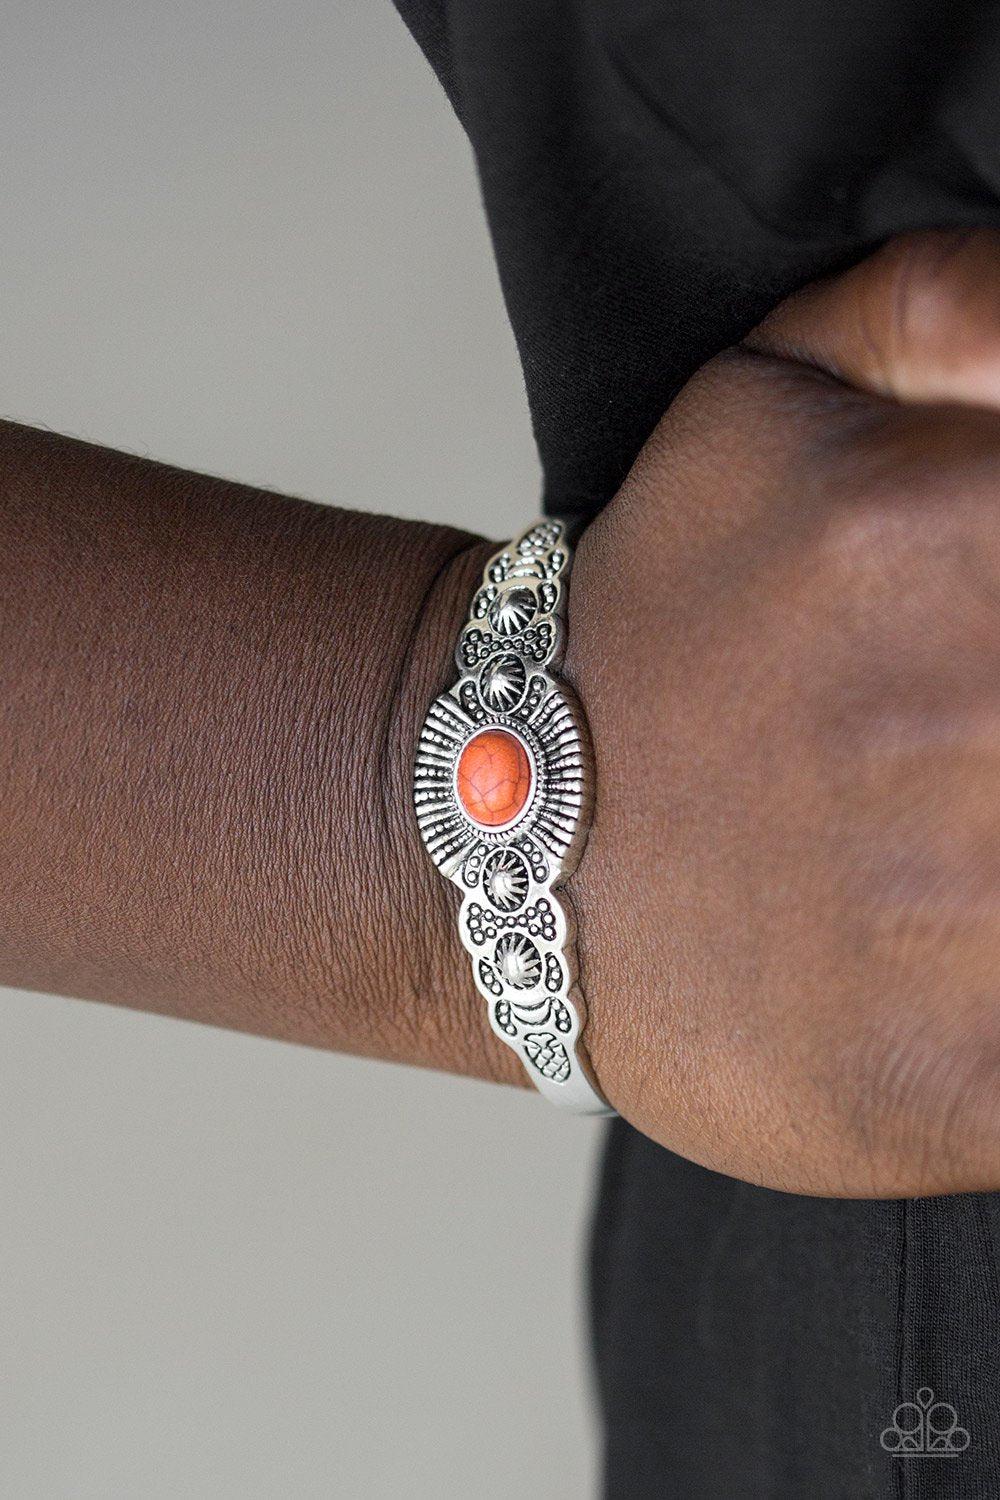 Wide Open Mesas Orange Stone and Silver Cuff Bracelet - Paparazzi Accessories - lightbox -CarasShop.com - $5 Jewelry by Cara Jewels